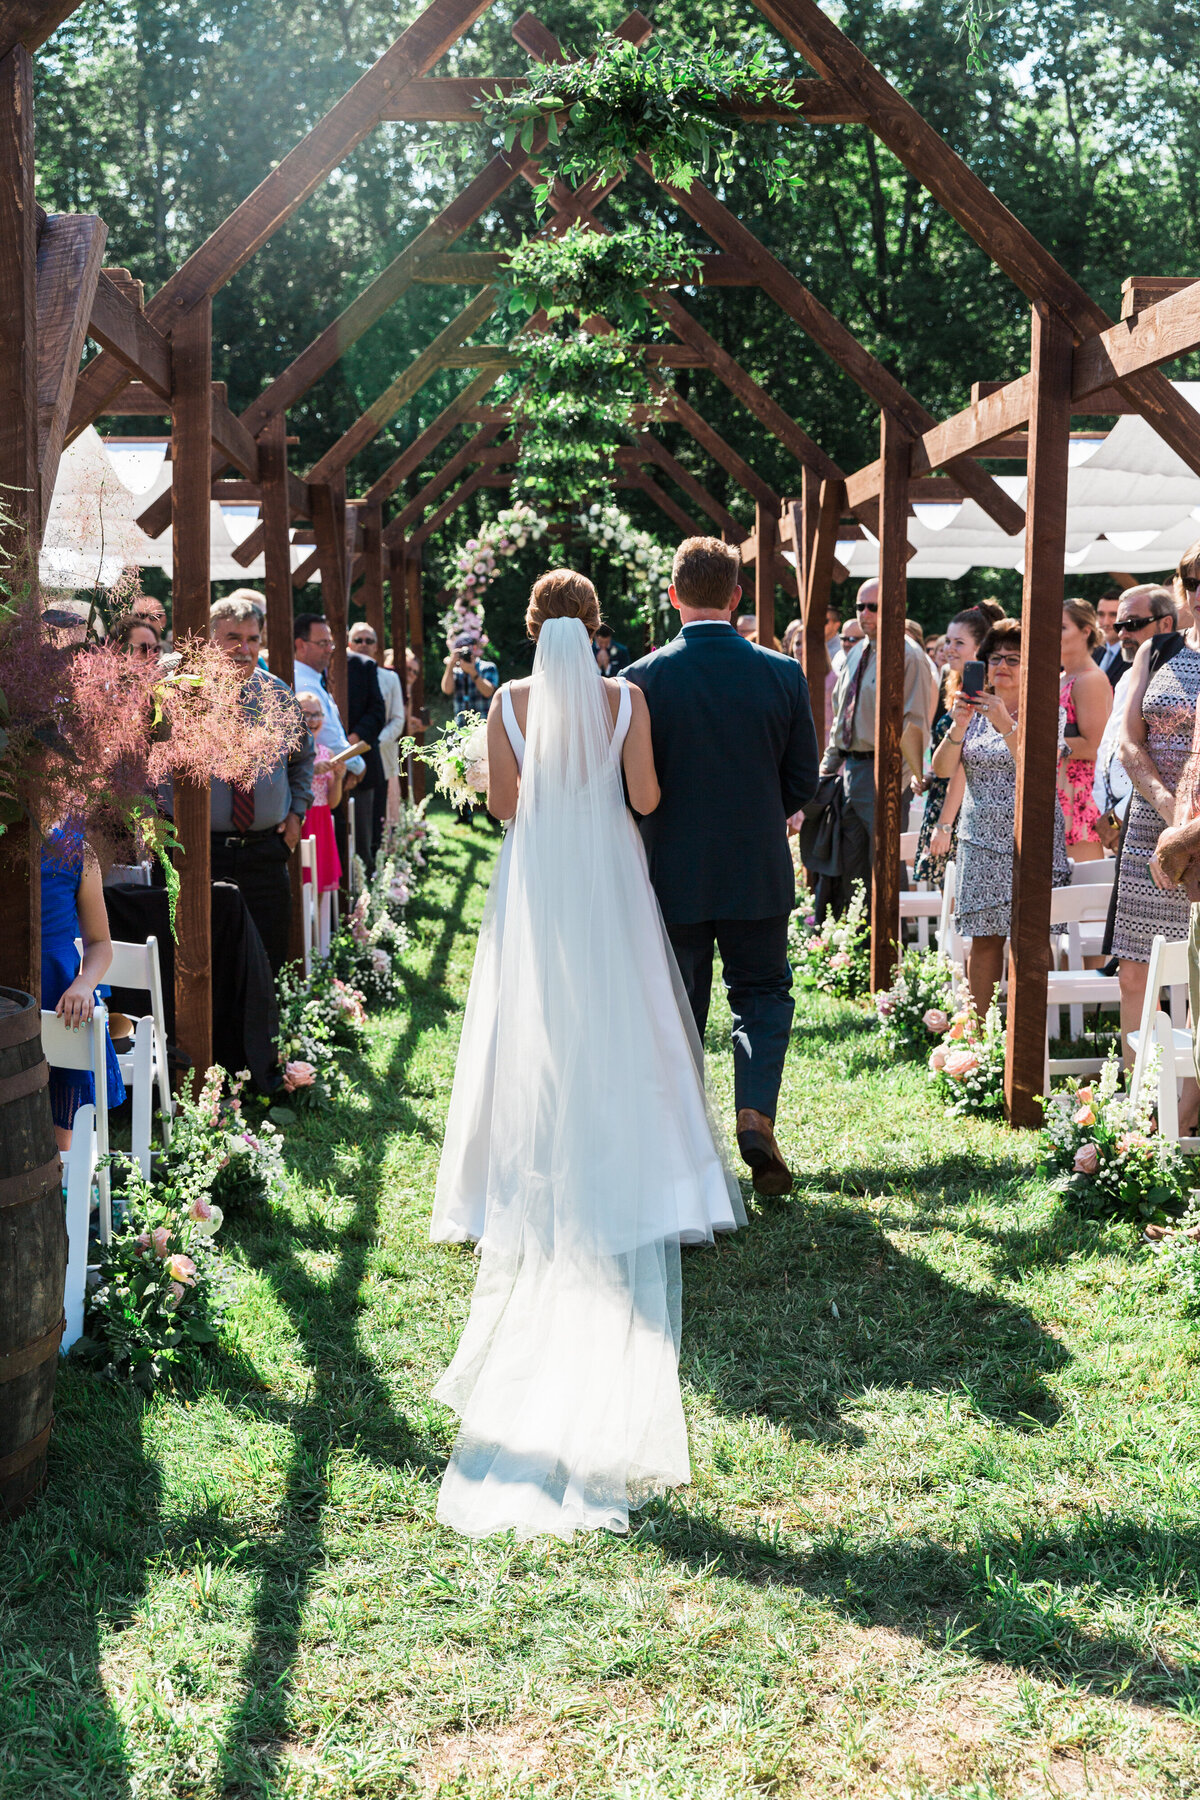 Bride and father walking down the aisle underneath wooden arches